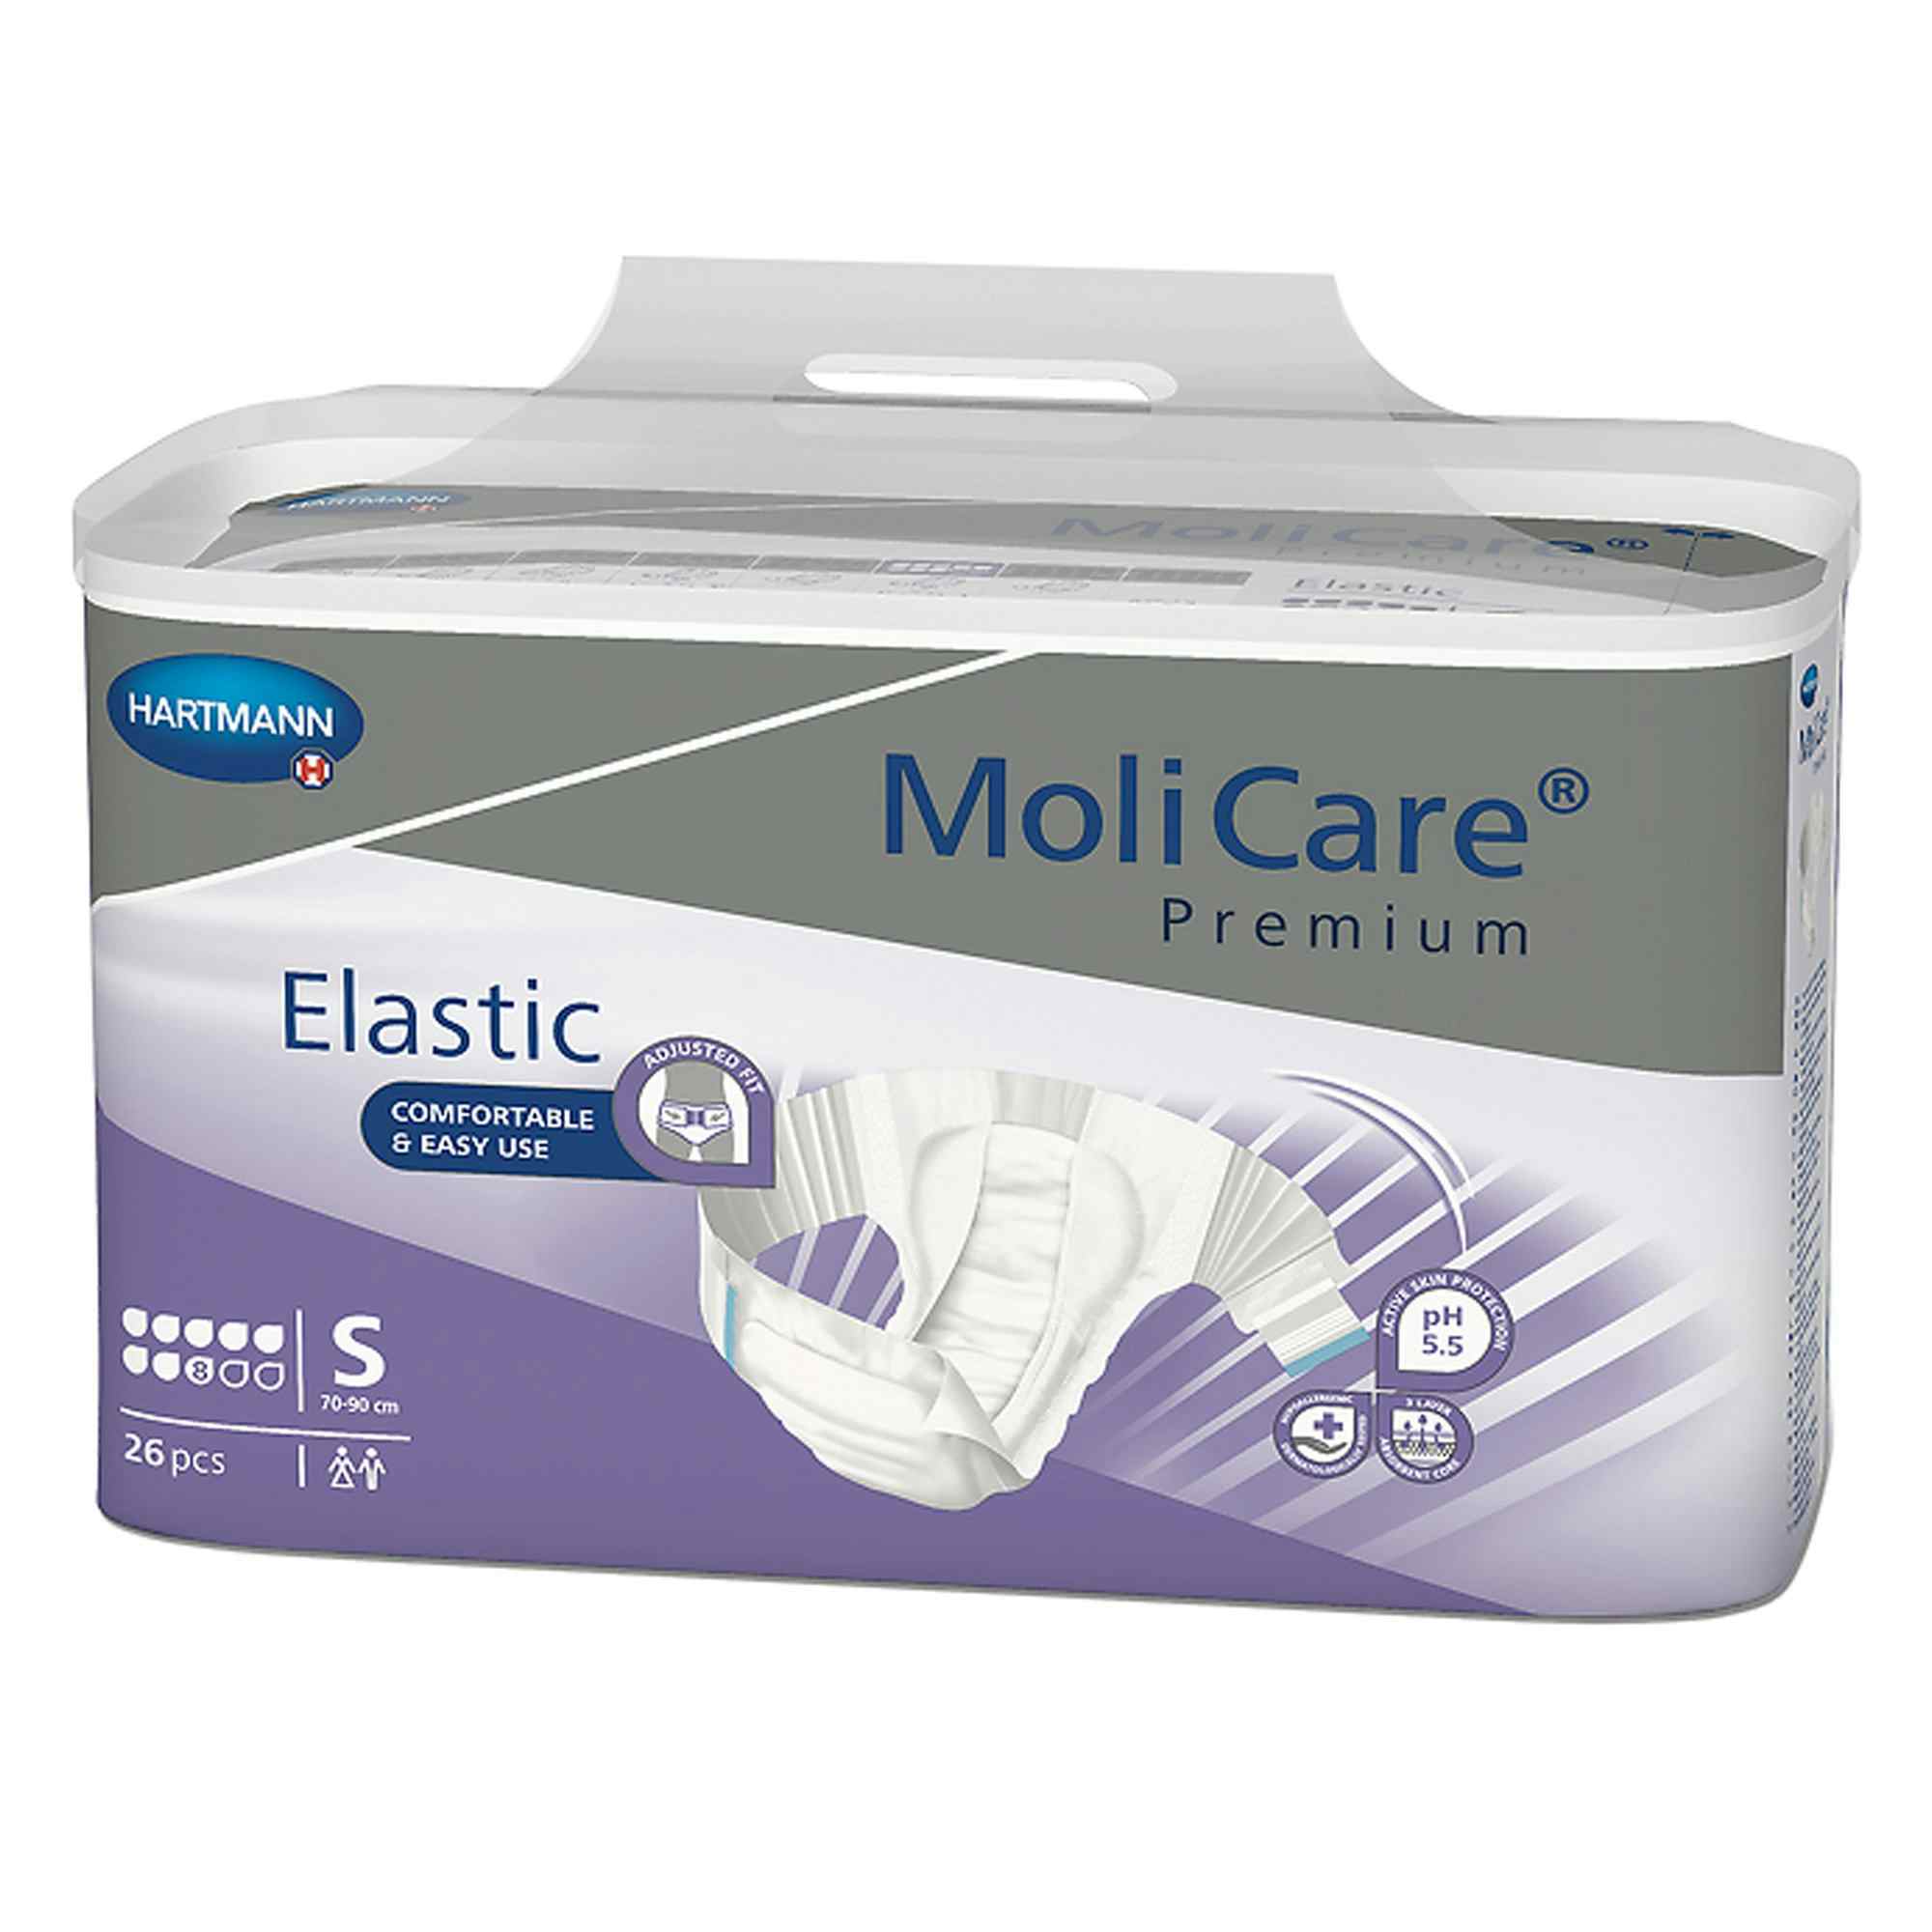 MoliCare Premium 8D Elastic Disposable Brief Adult Diapers with Tabs, Heavy Absorbency, 165471, Small (27-35") - Case of 90